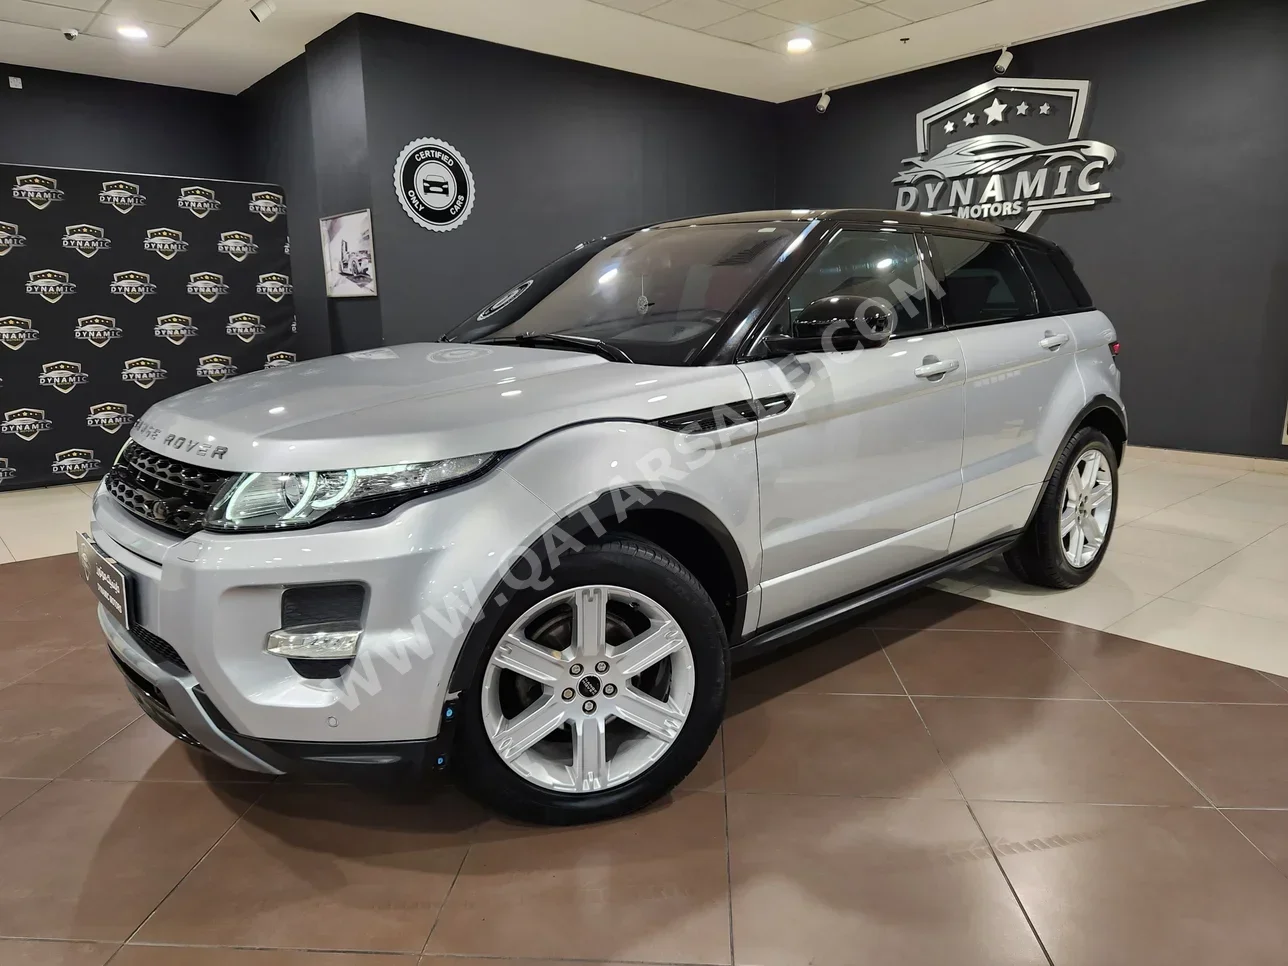 Land Rover  Evoque  Dynamic  2015  Automatic  73,000 Km  4 Cylinder  Four Wheel Drive (4WD)  SUV  Silver